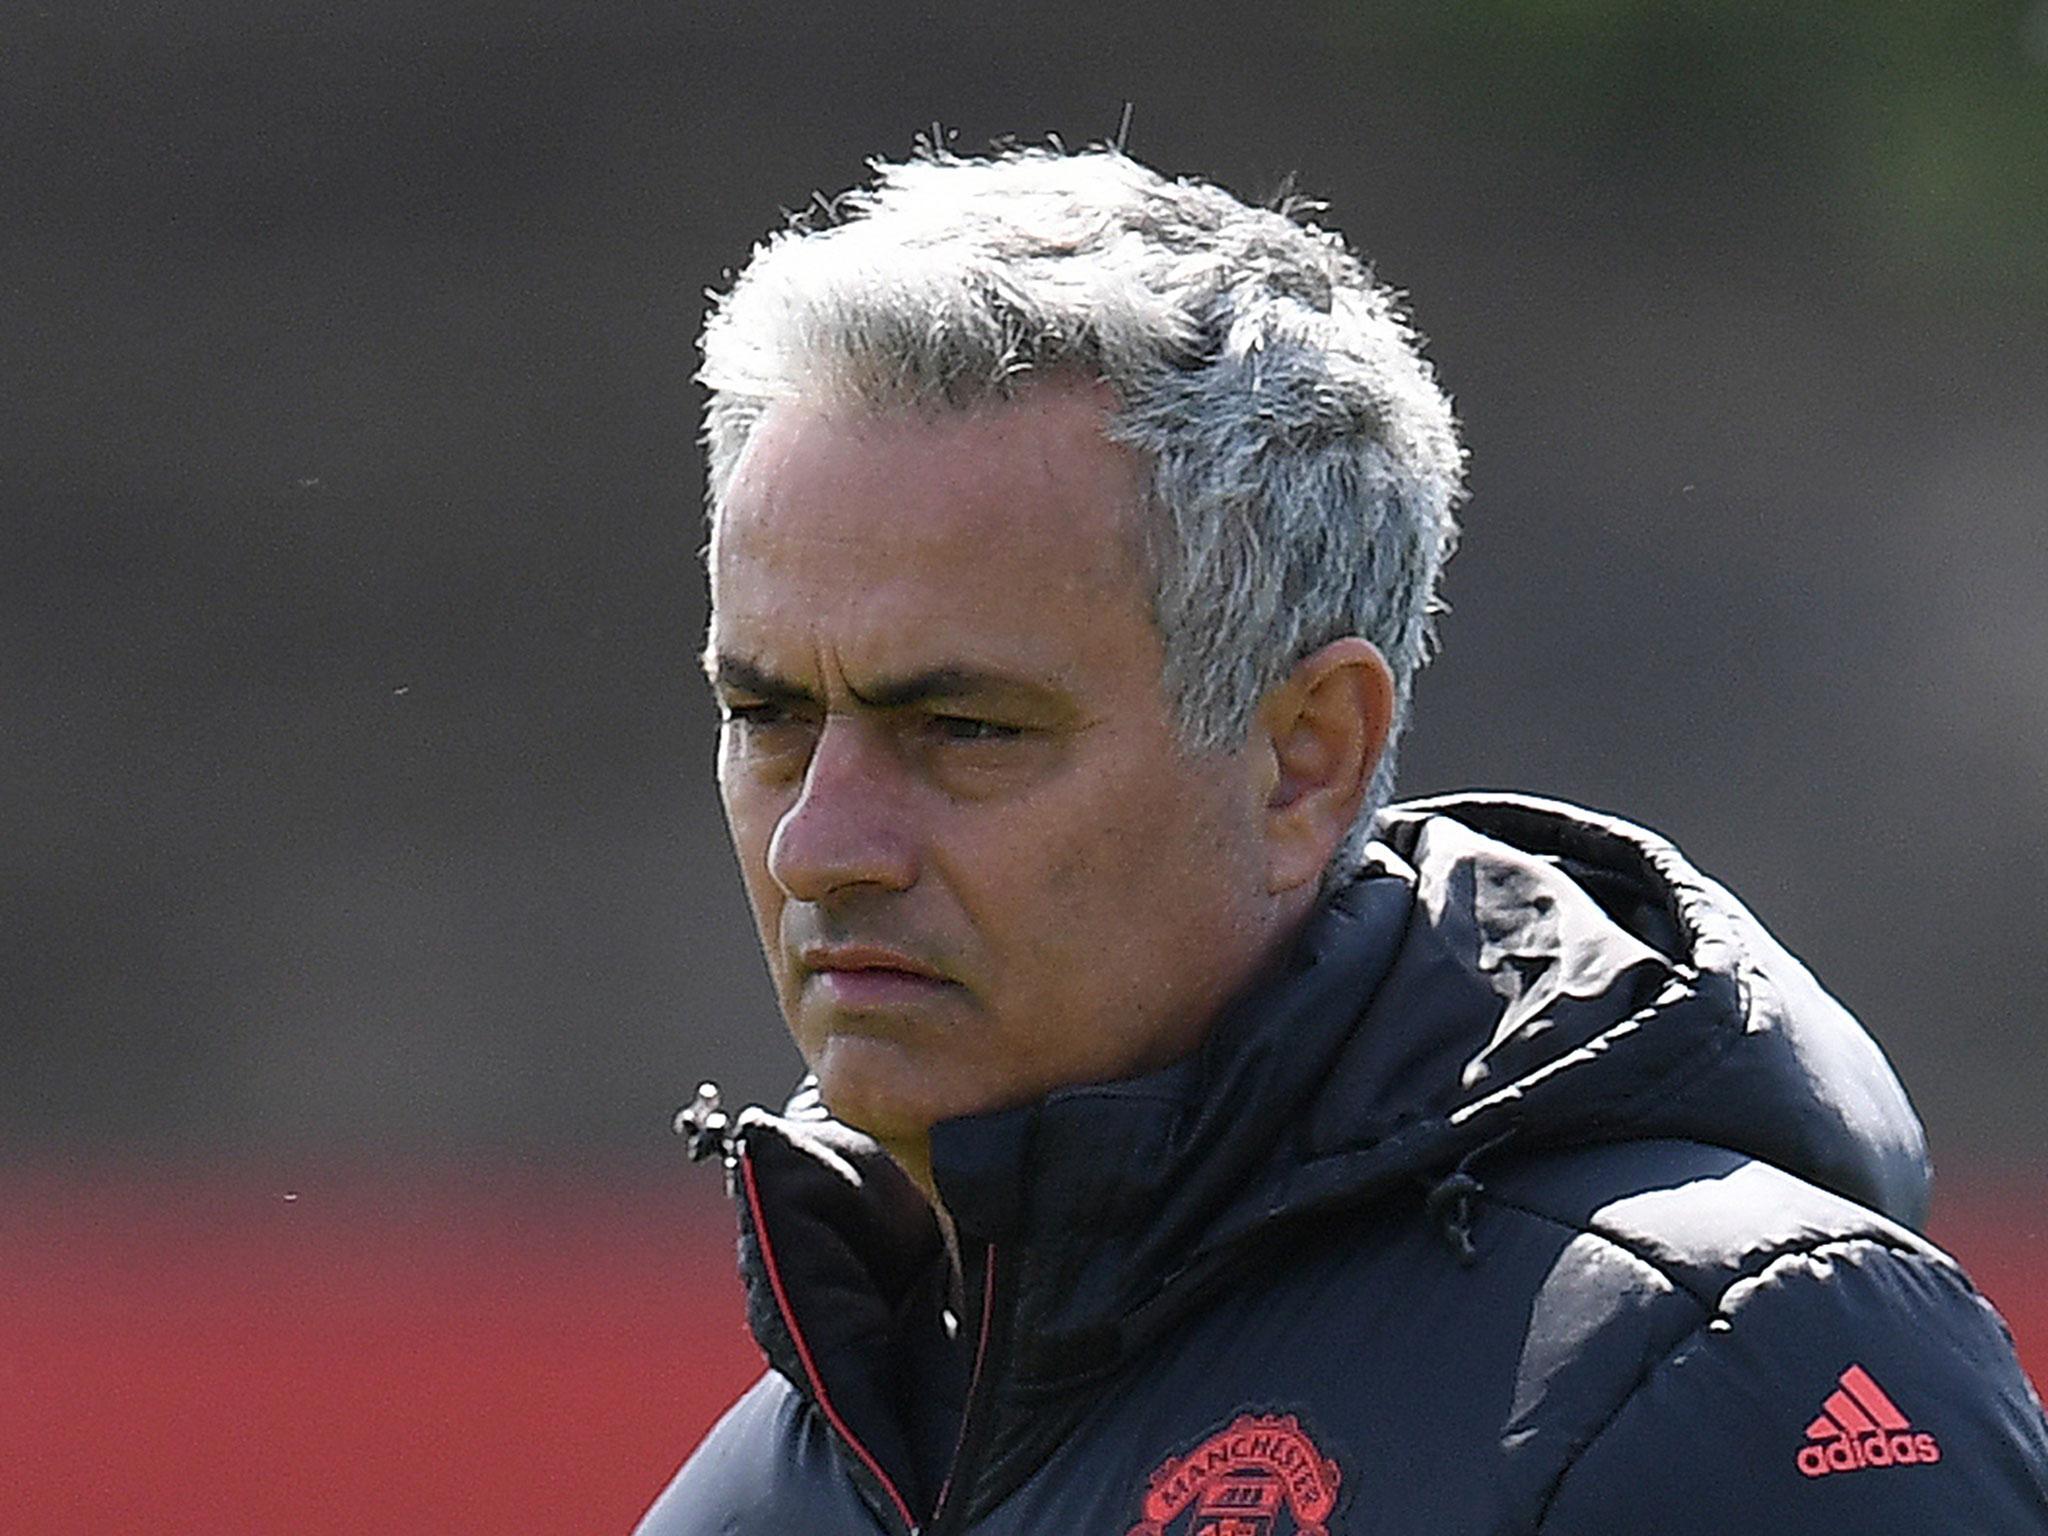 Jose Mourinho and his team will travel to Norway as part of the pre-season tour